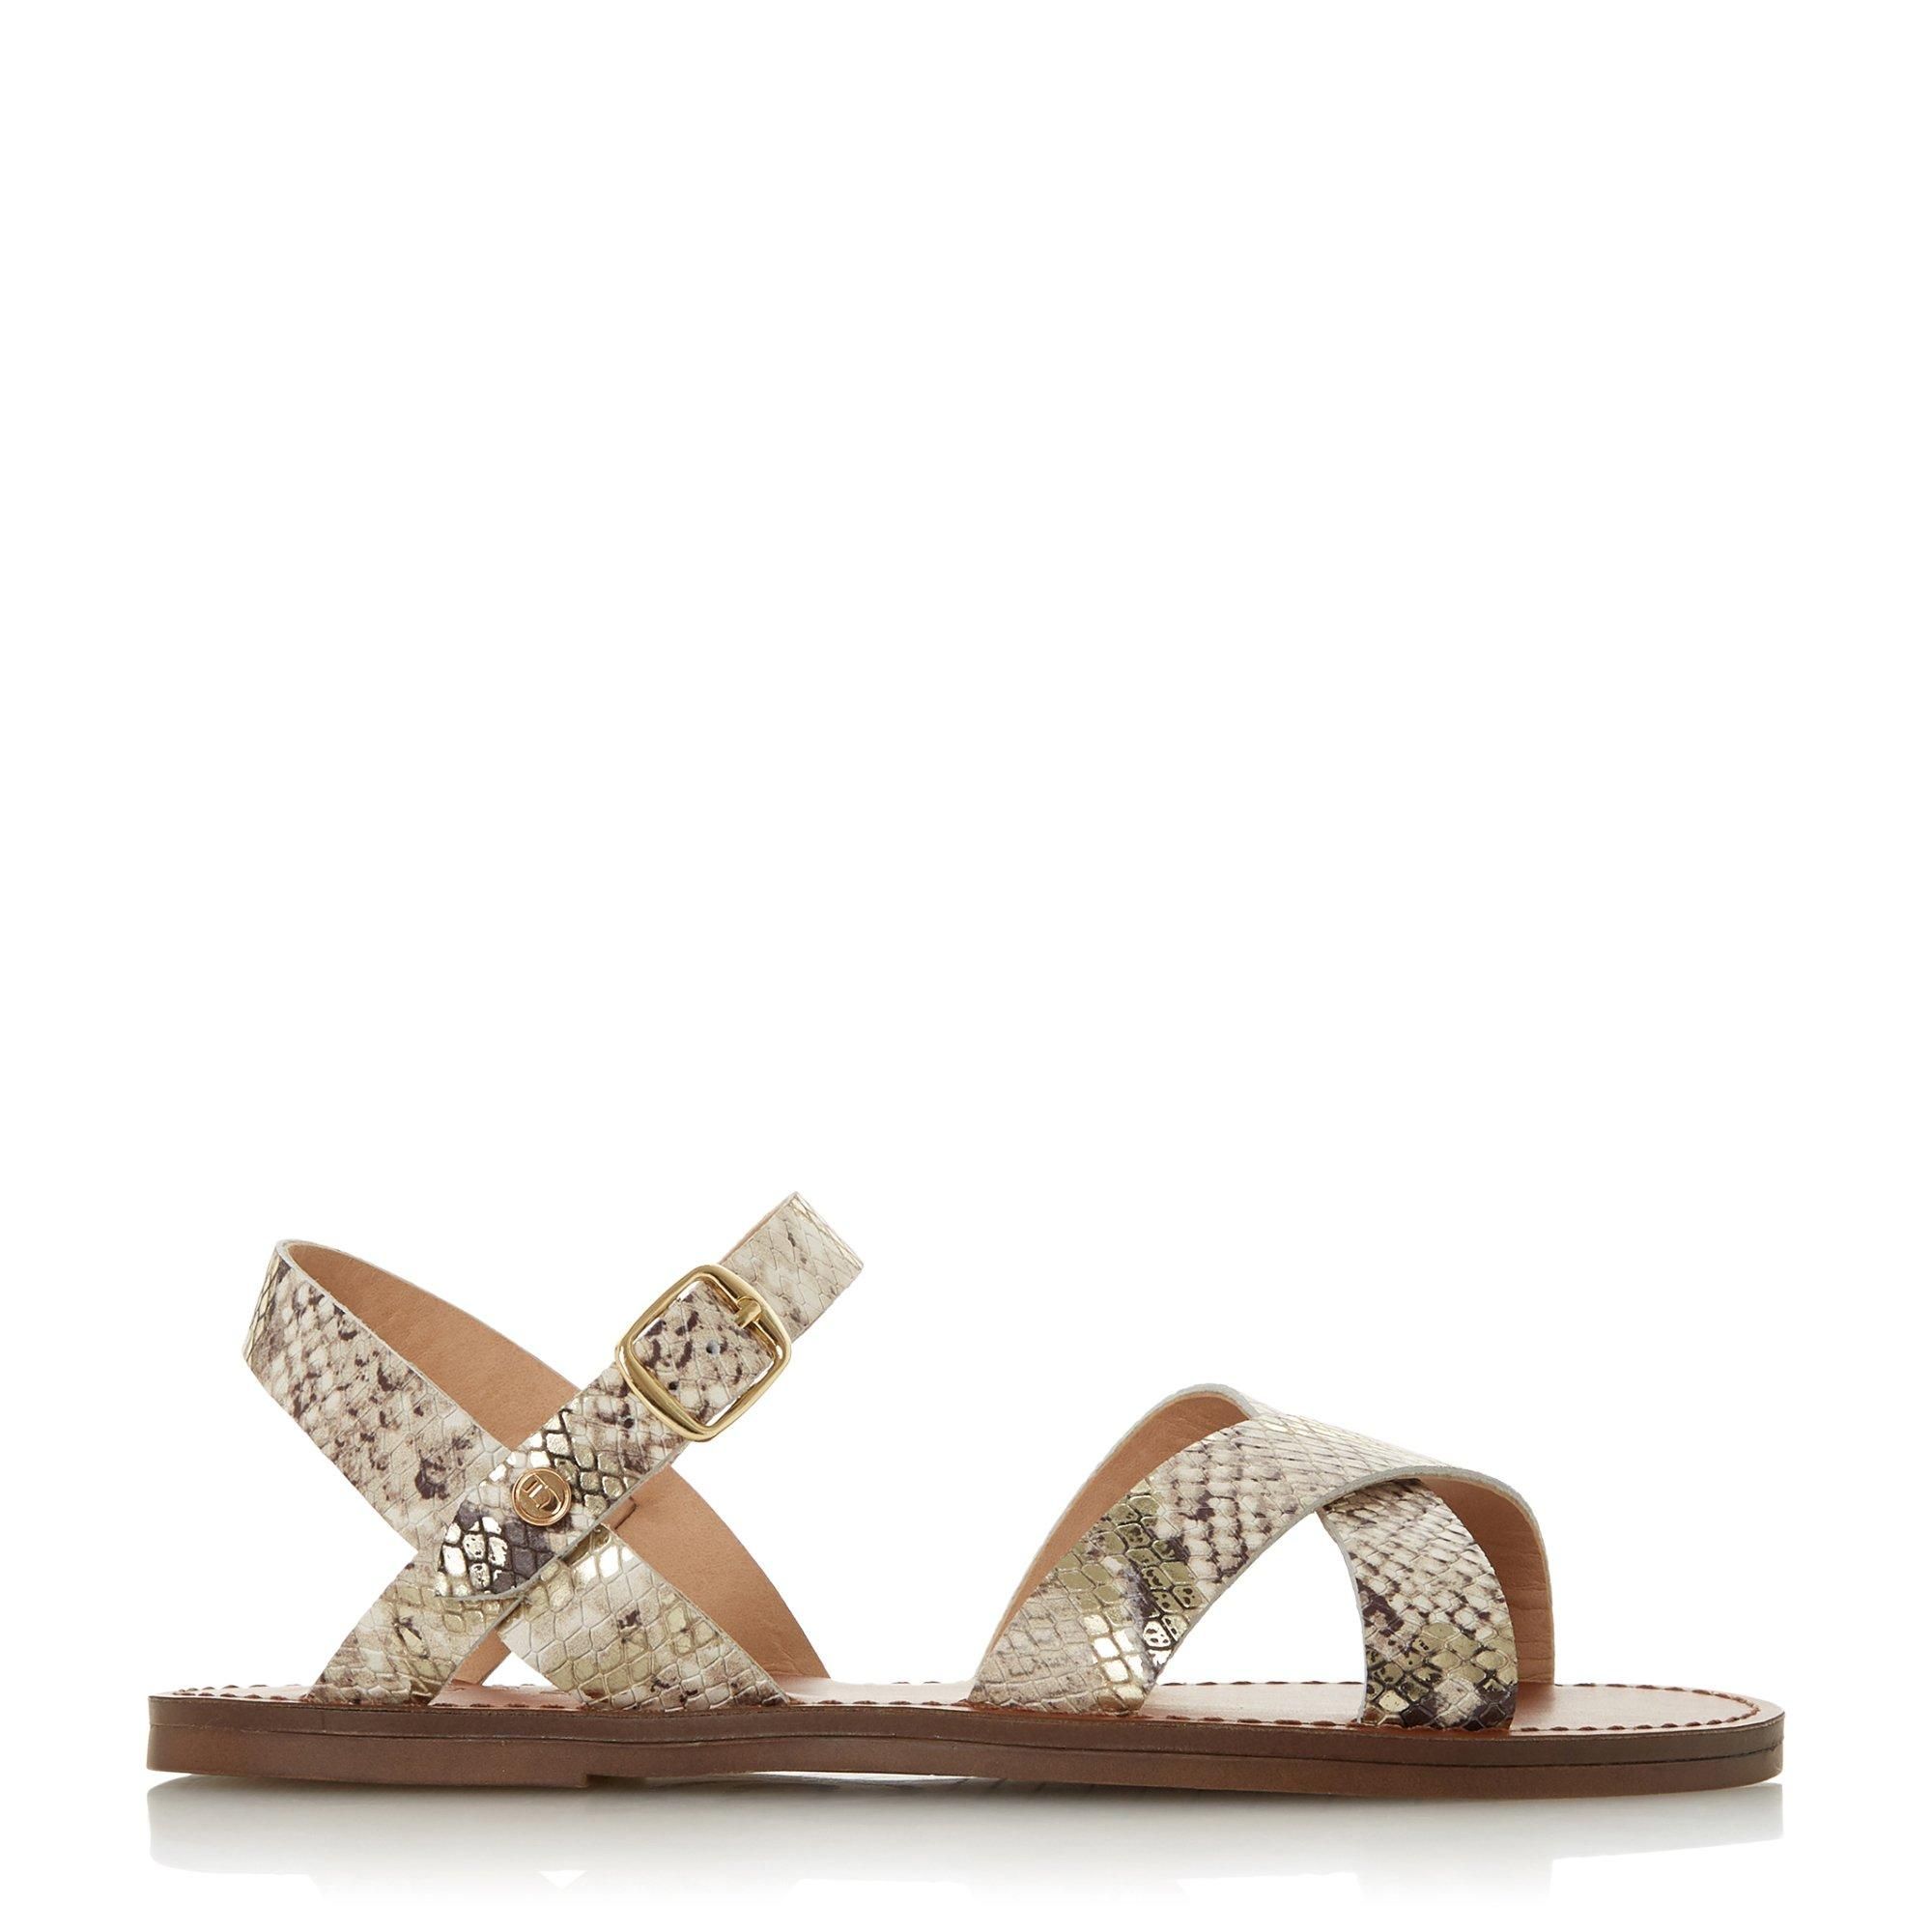 Upgrade your summer style with the WF Lavell sandal by Dune London. Designed with chic cross-over straps and a comfortable flat sole. It's complete with an ankle strap and gold-tone buckle fastening.